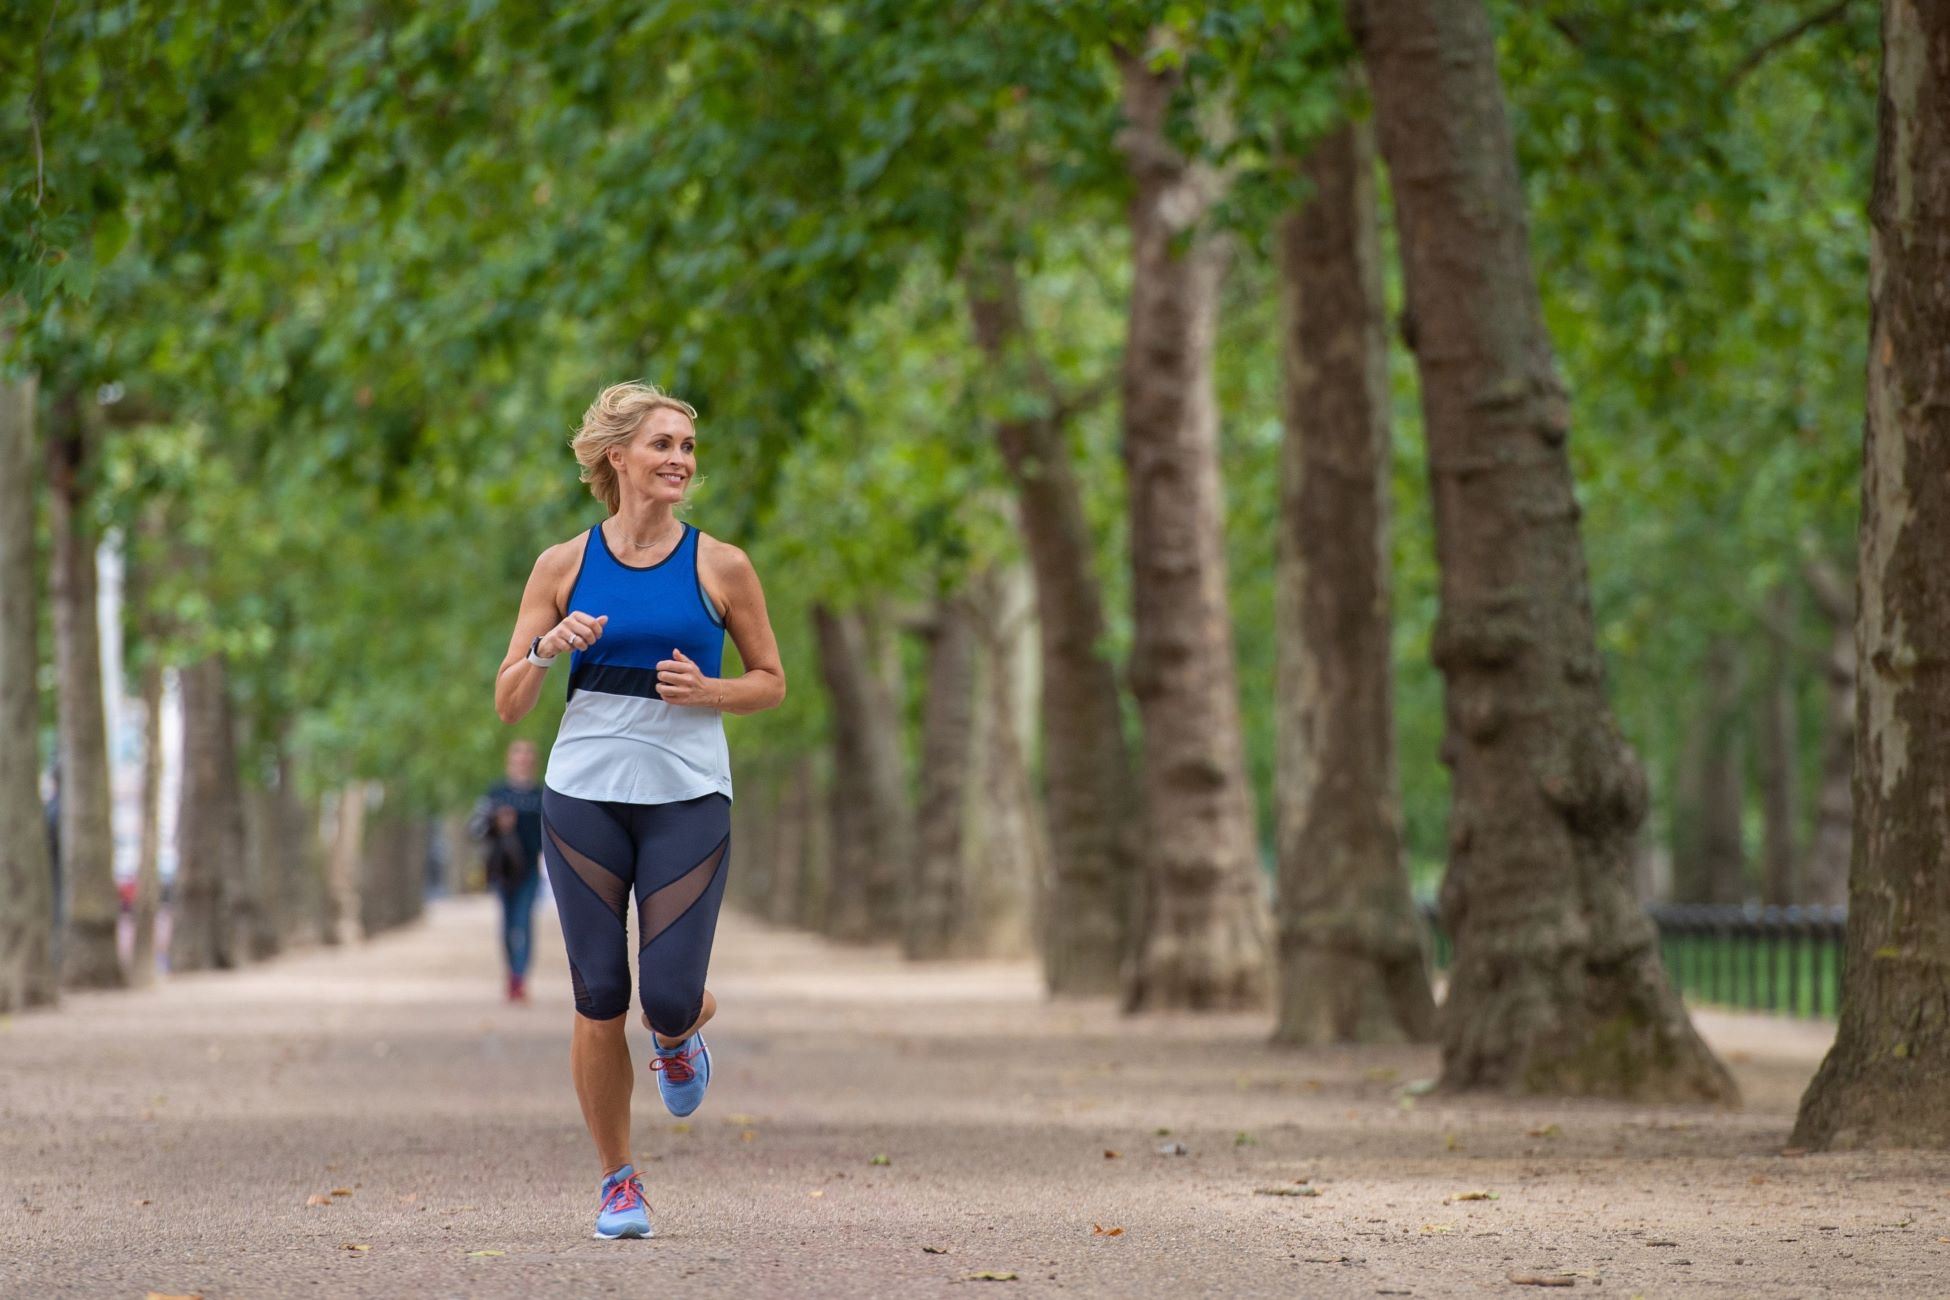 Jenni Falconer Shares Her Experiences As A Dedicated Runner